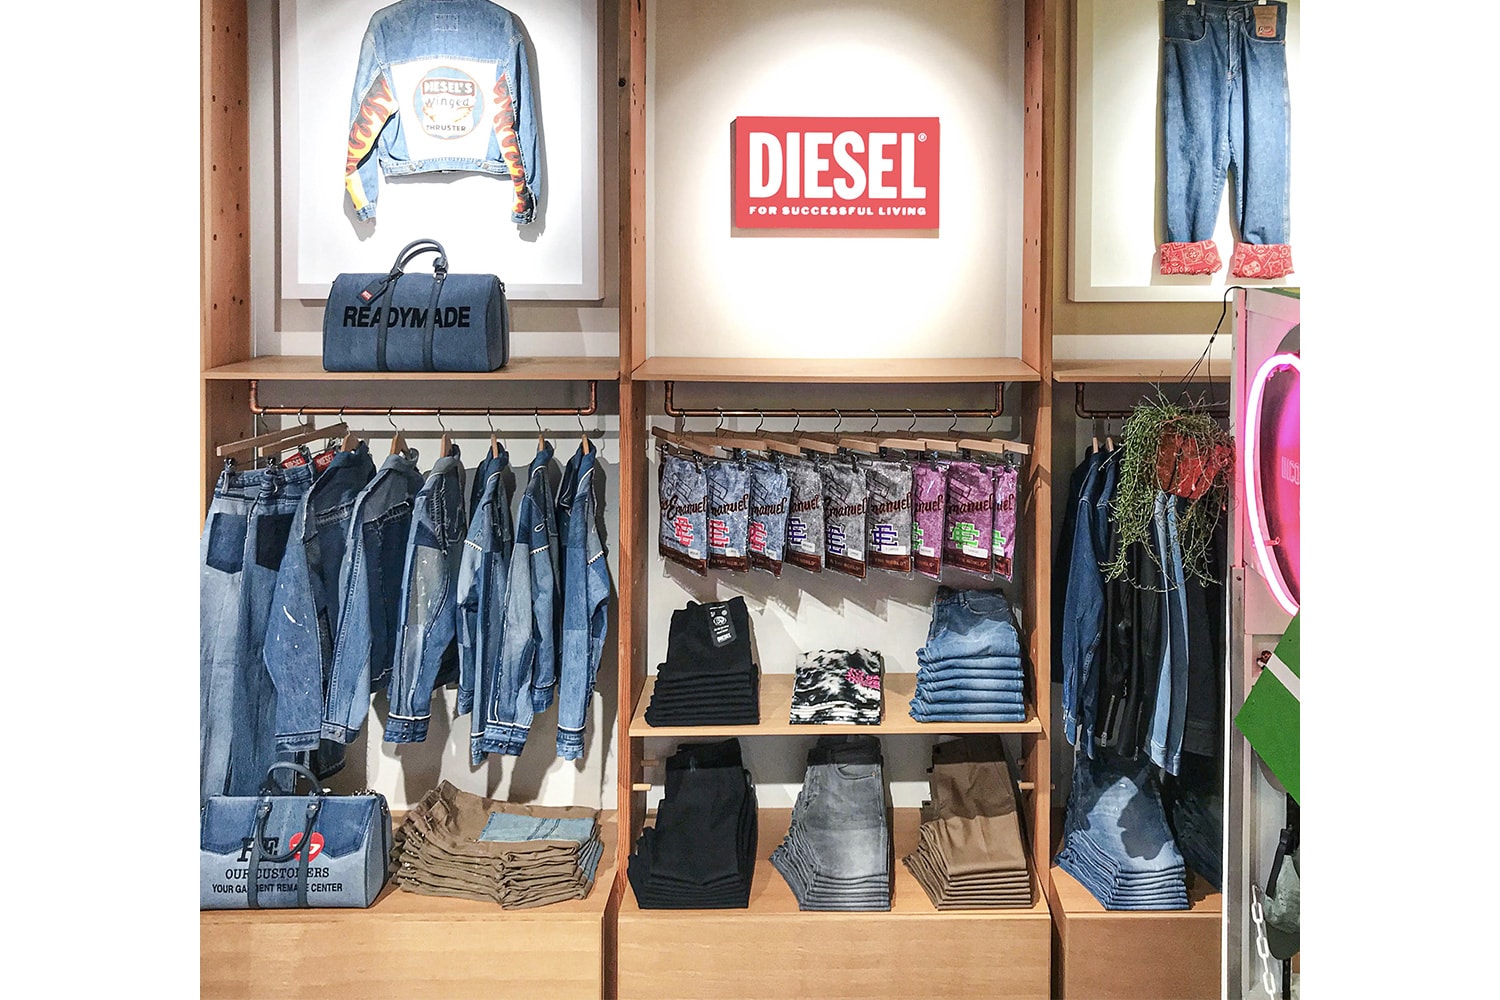 Diesel Announces Partnership With Fred Segal red tag collaboration READYMADE A-Cold-wall* samuel ross yuta hosokawa eric emanuel purchase info details  